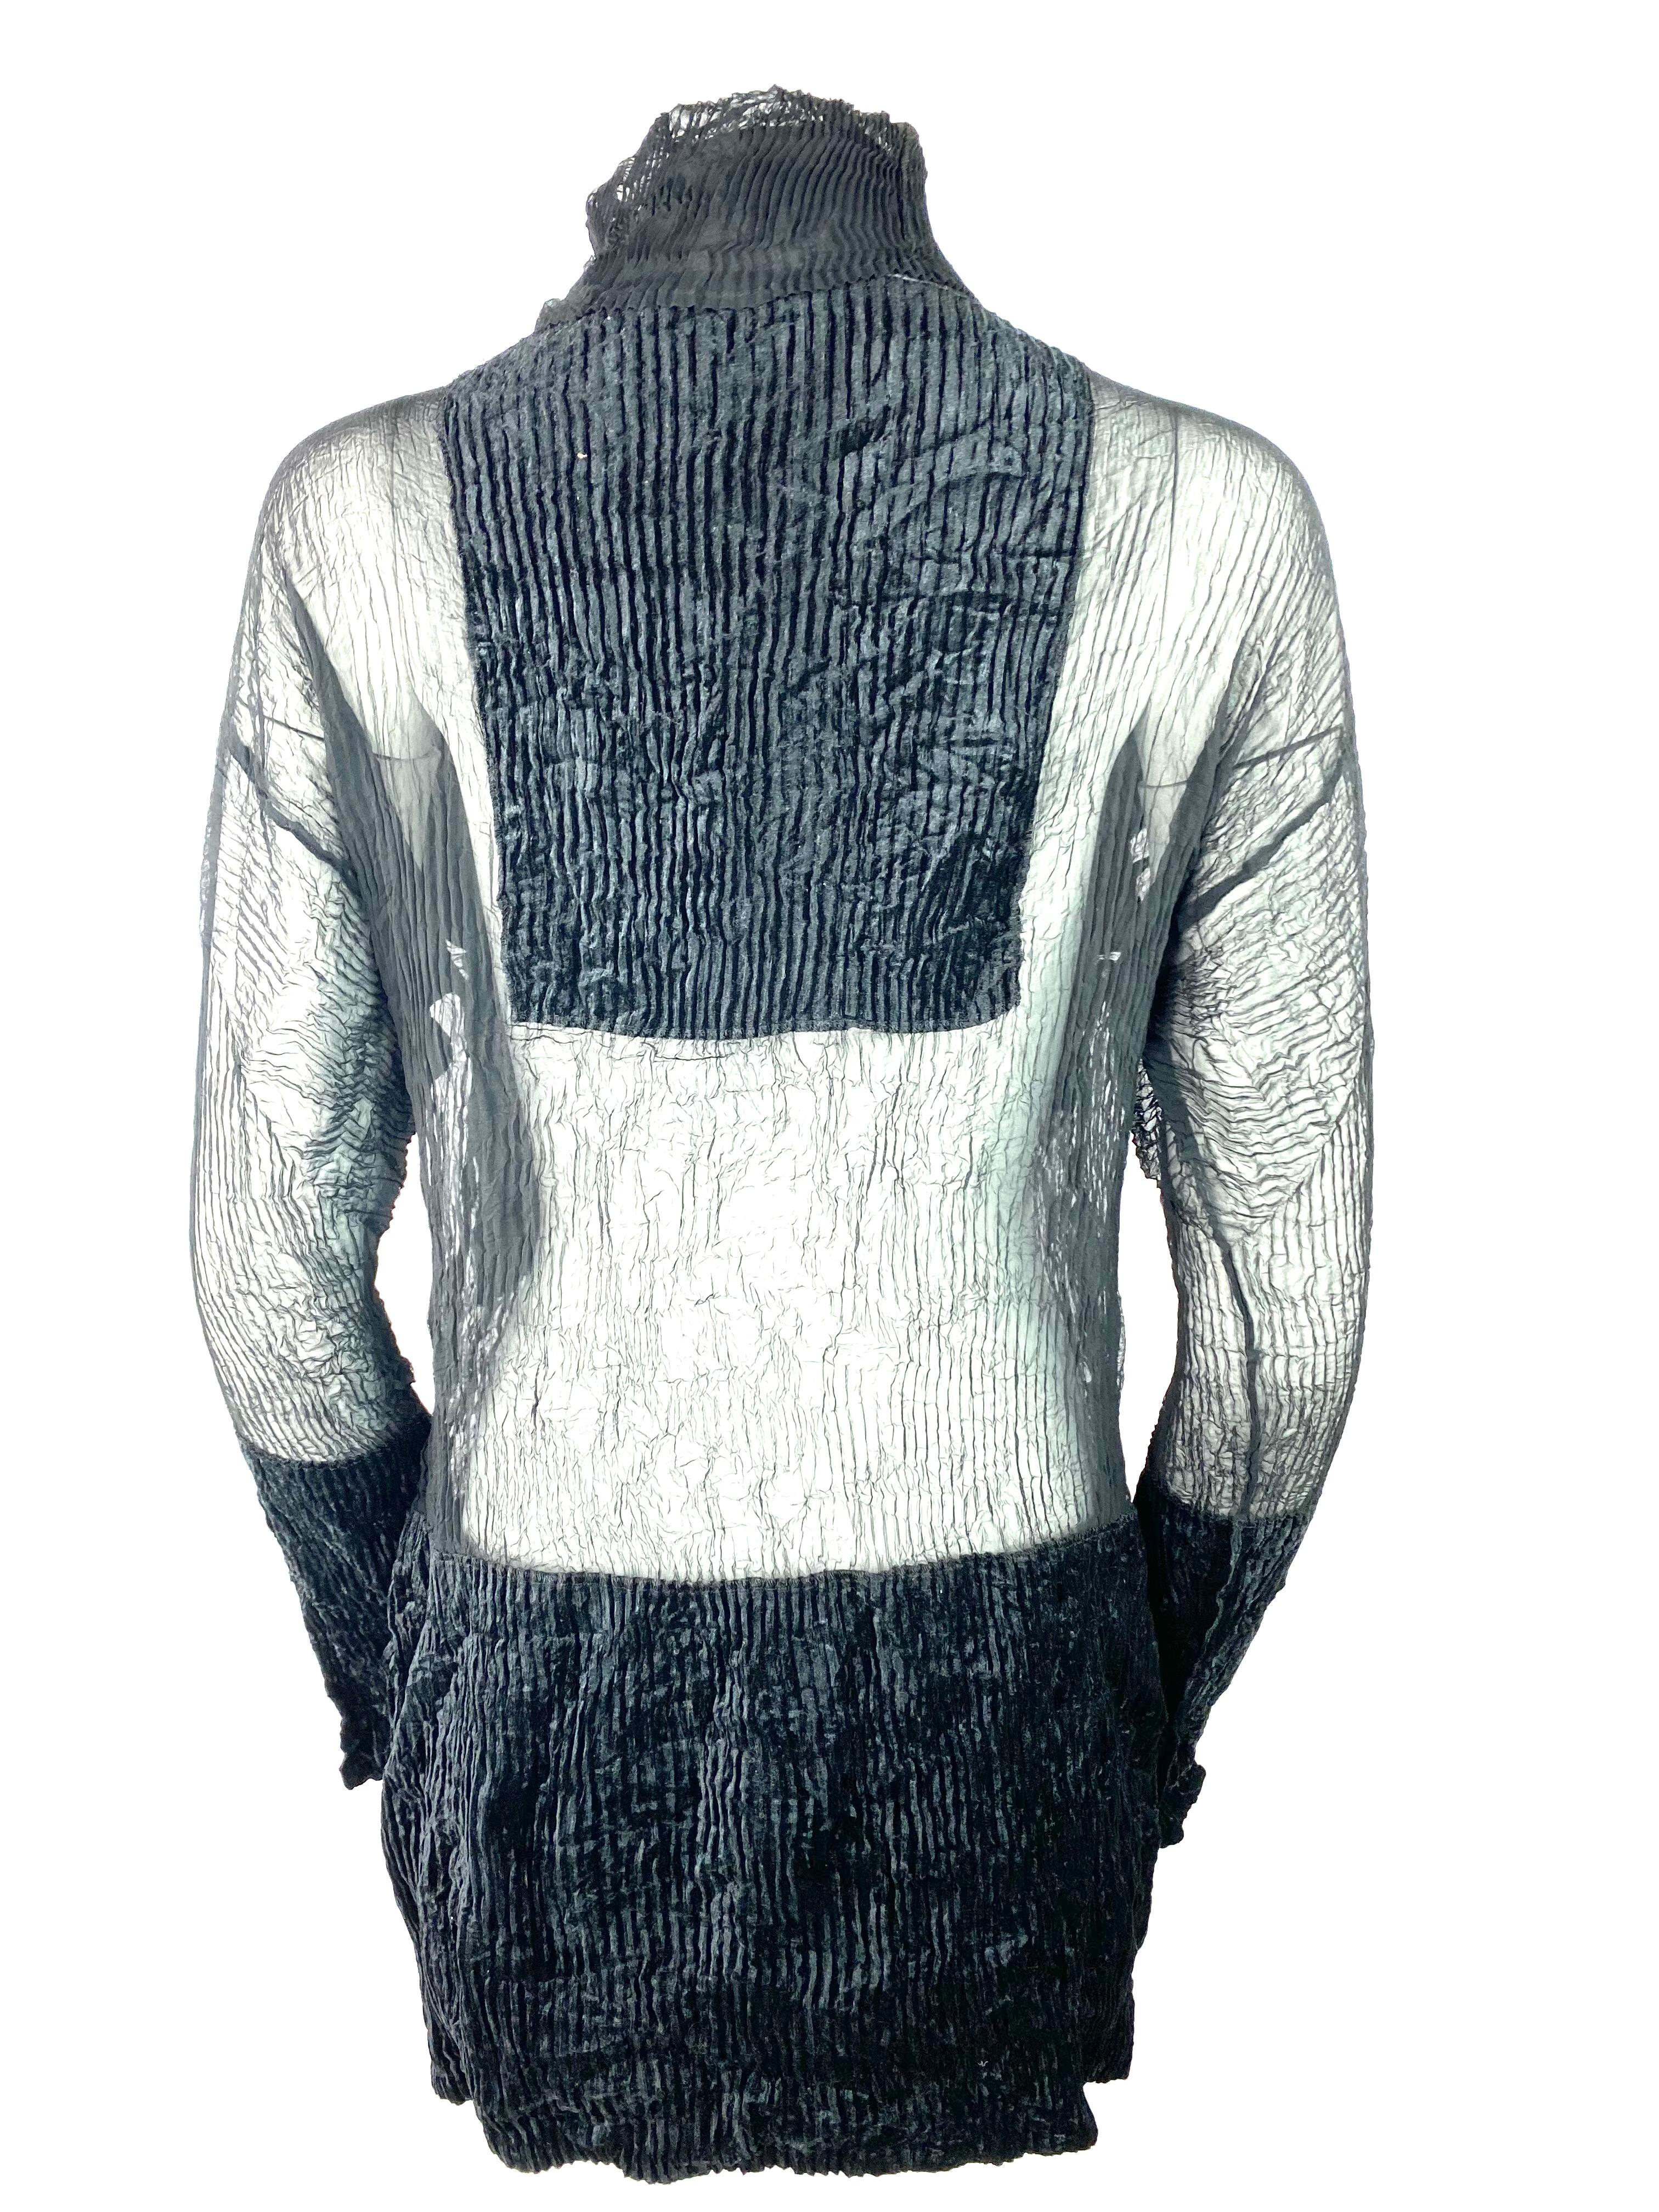 Vintage Issey Miyake Black Turtle Neck Top, Size Large In Excellent Condition For Sale In Beverly Hills, CA